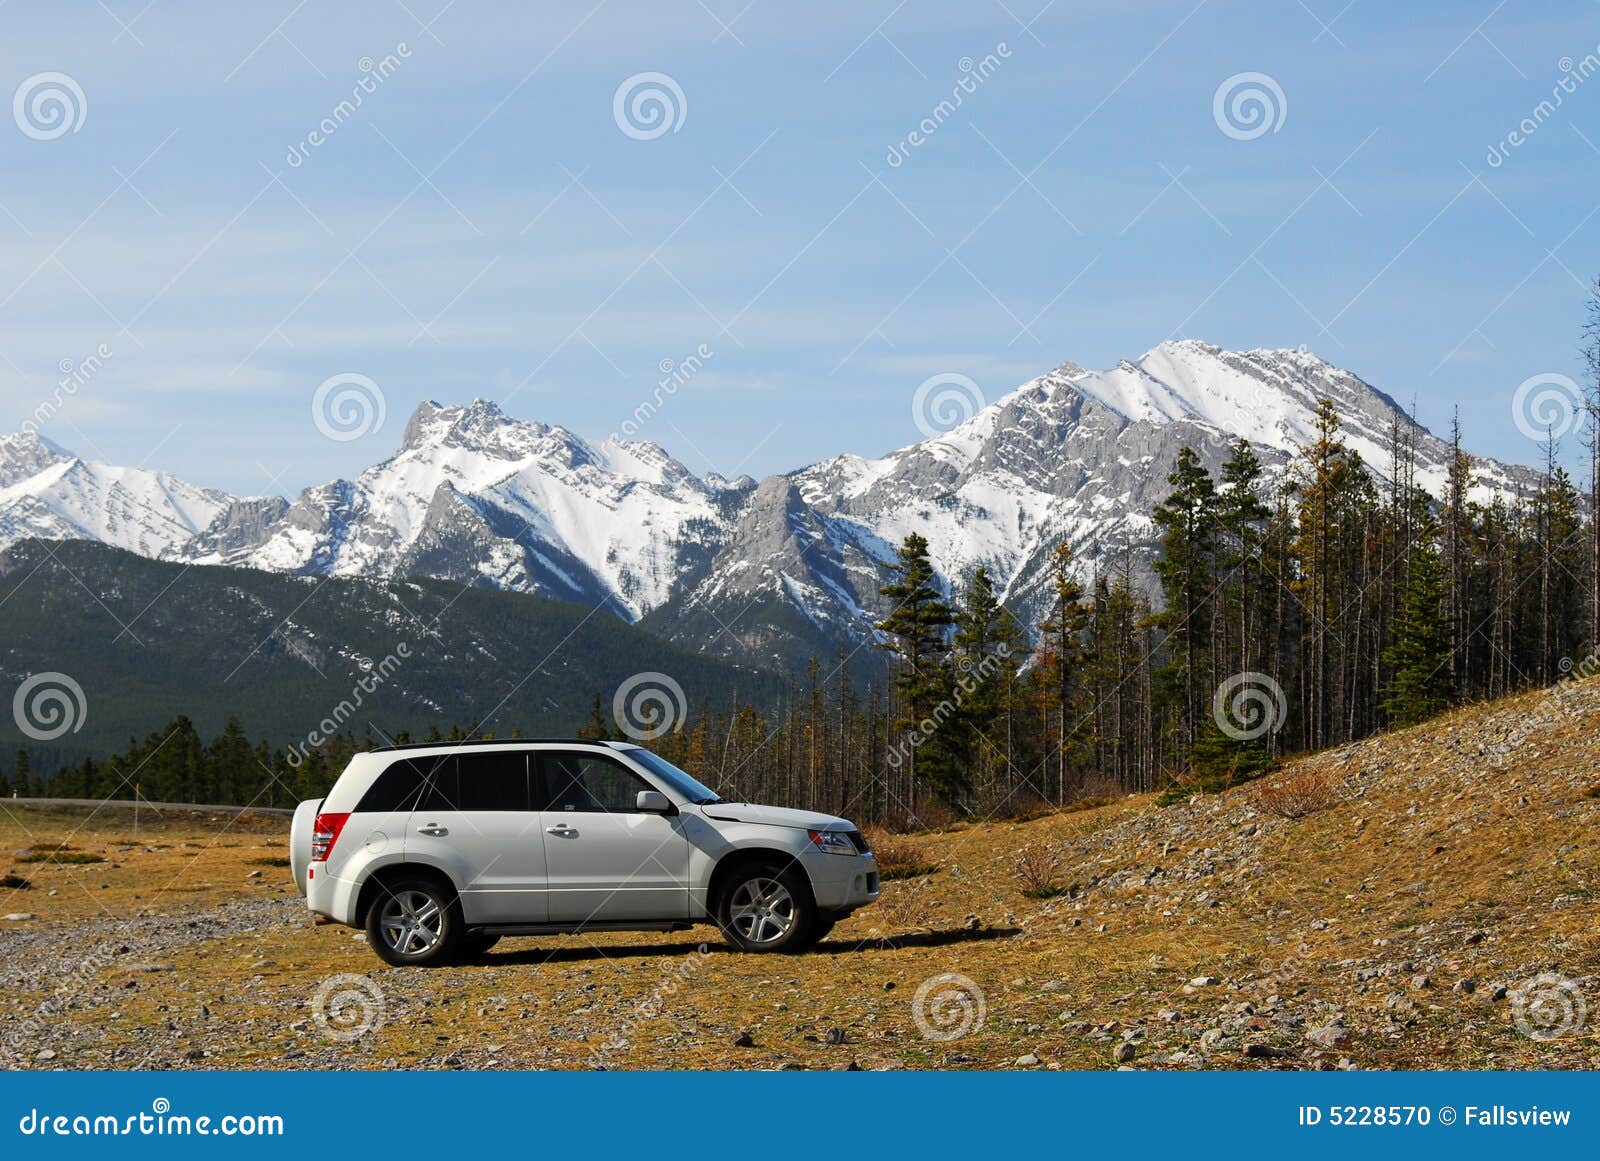 suv and mountains